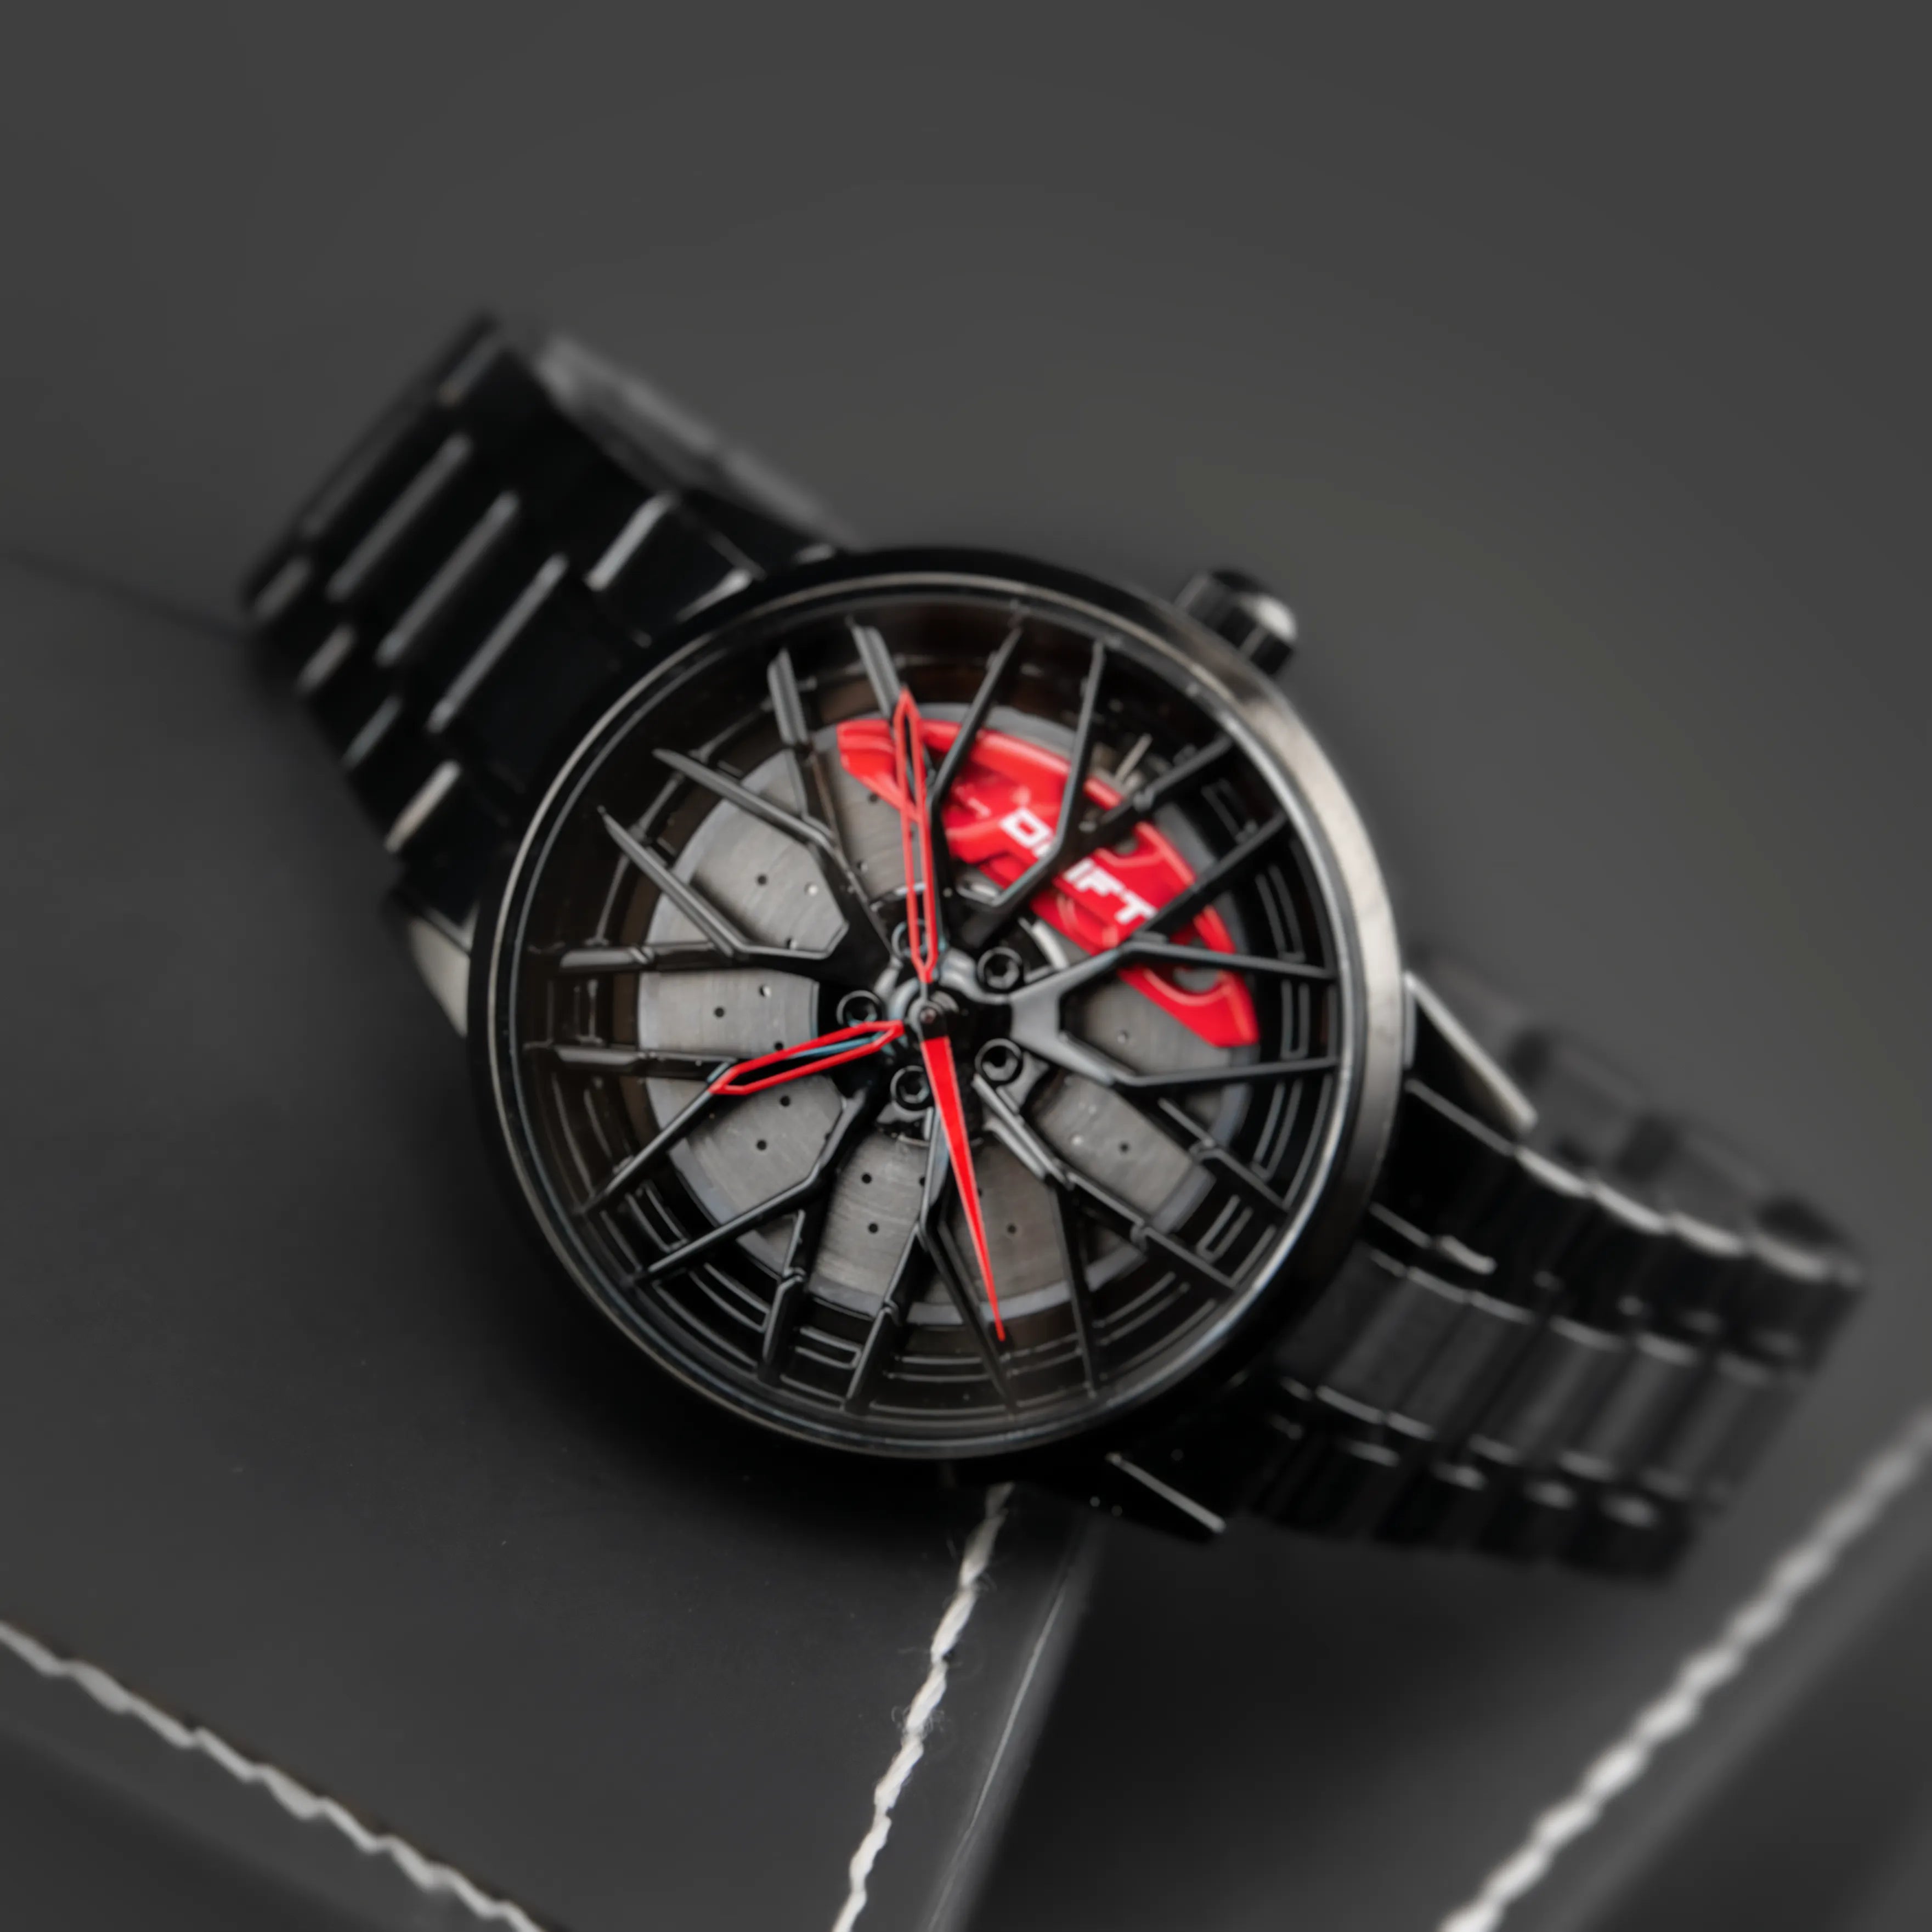 Ferris Wheel Elements Colorful Gems Design Fashion Design Watches Ceramic  Body Advanced Mechanical Watches - China Watch and Men's Watch price |  Made-in-China.com